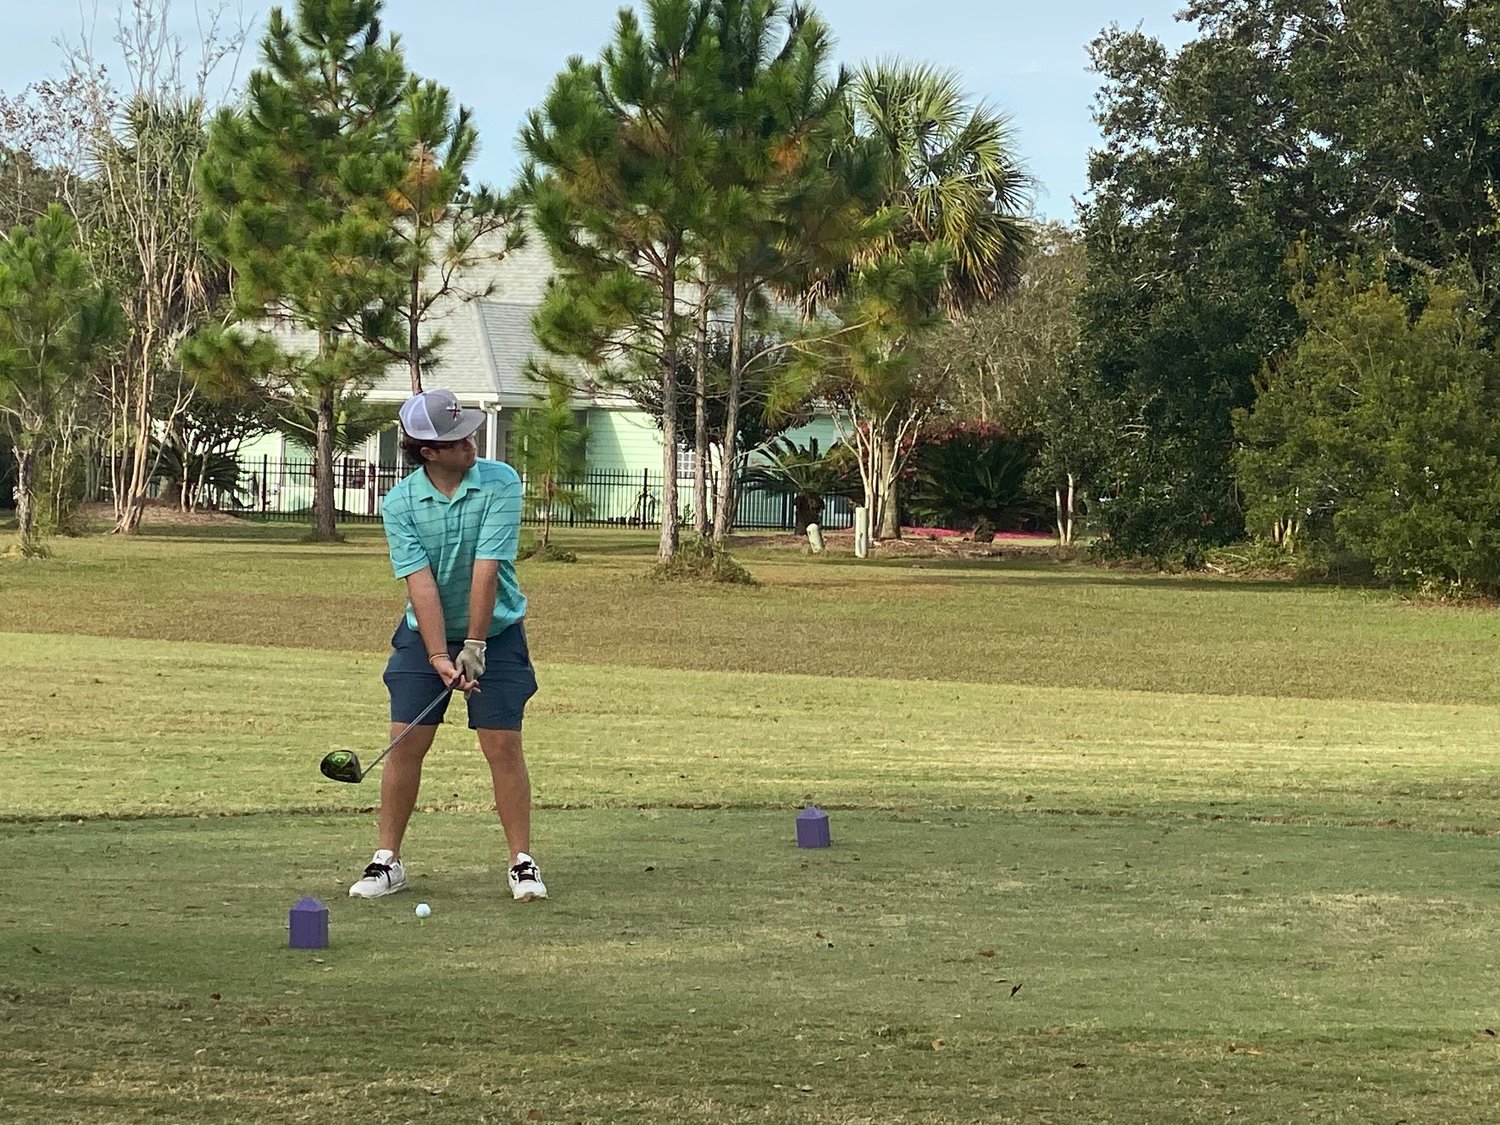 A scholarship program is being established for participants of the Junior Golf Program at GlenLakes Golf Club to commemorate the course’s tin anniversary. Graduating high school seniors will be eligible for application.